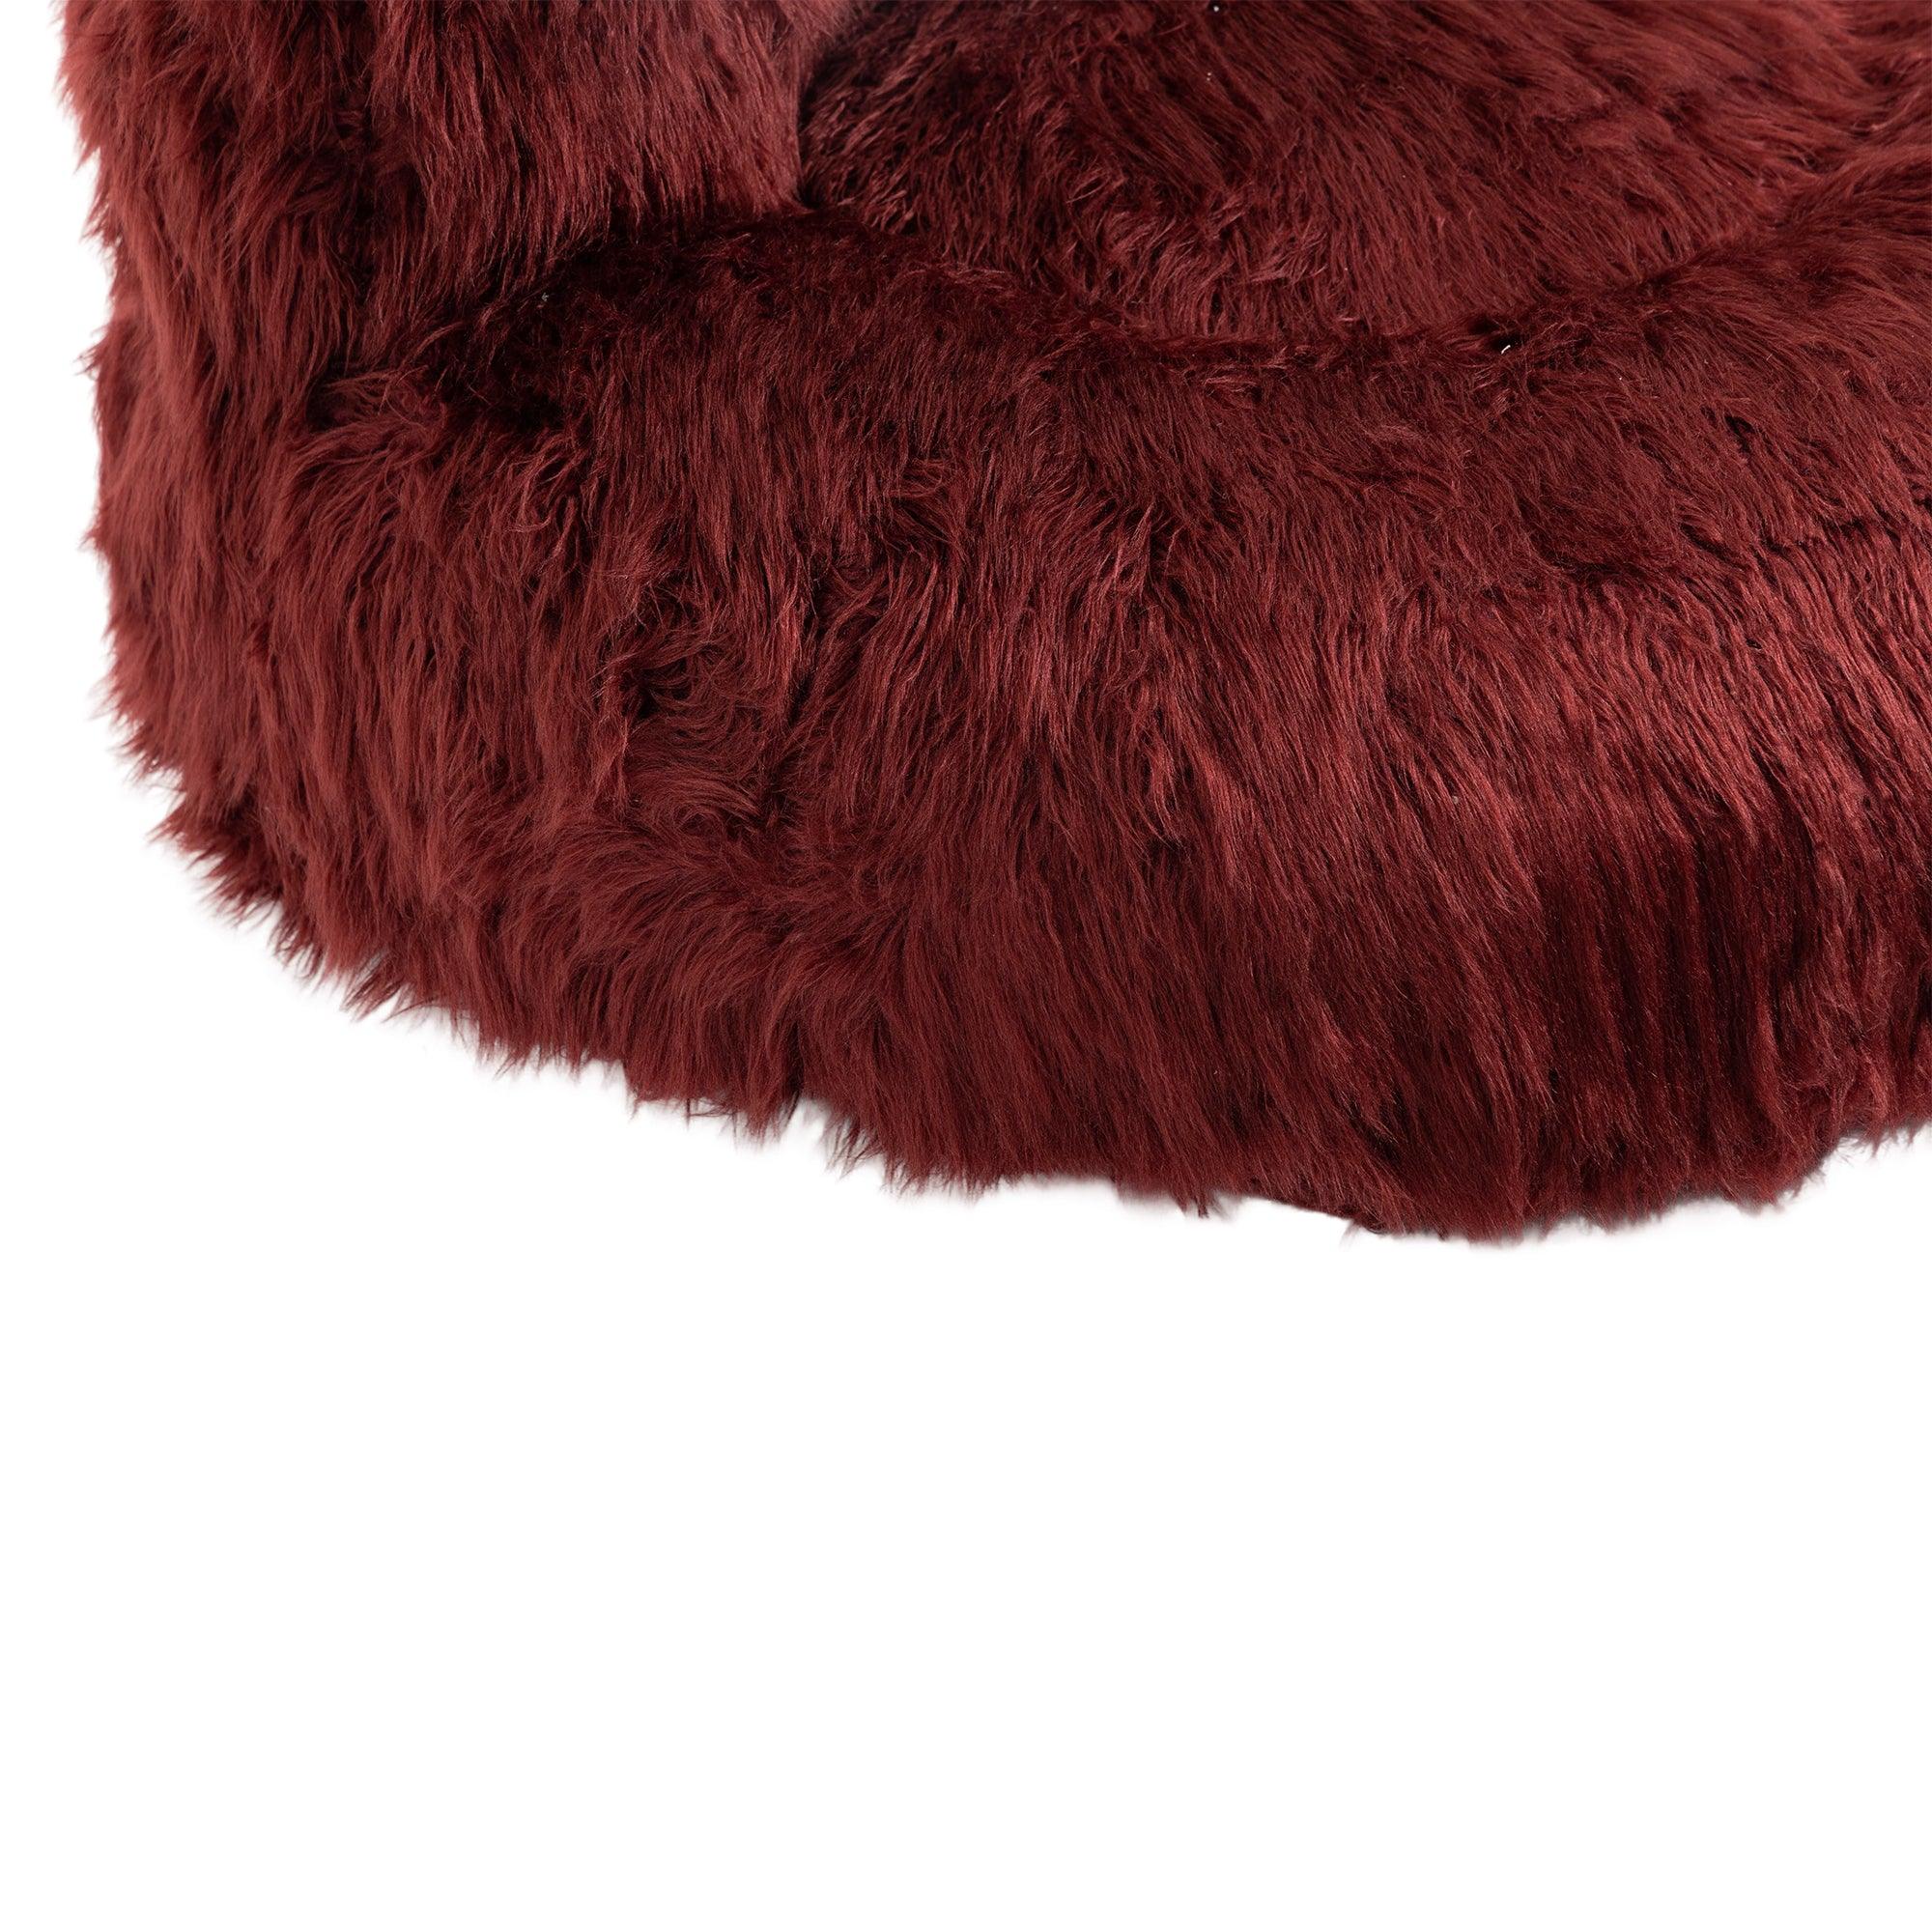 Gramanda Bean Bag Faux Fur Lazy Sofa + Footstool For Adults And Kids - Wine Red